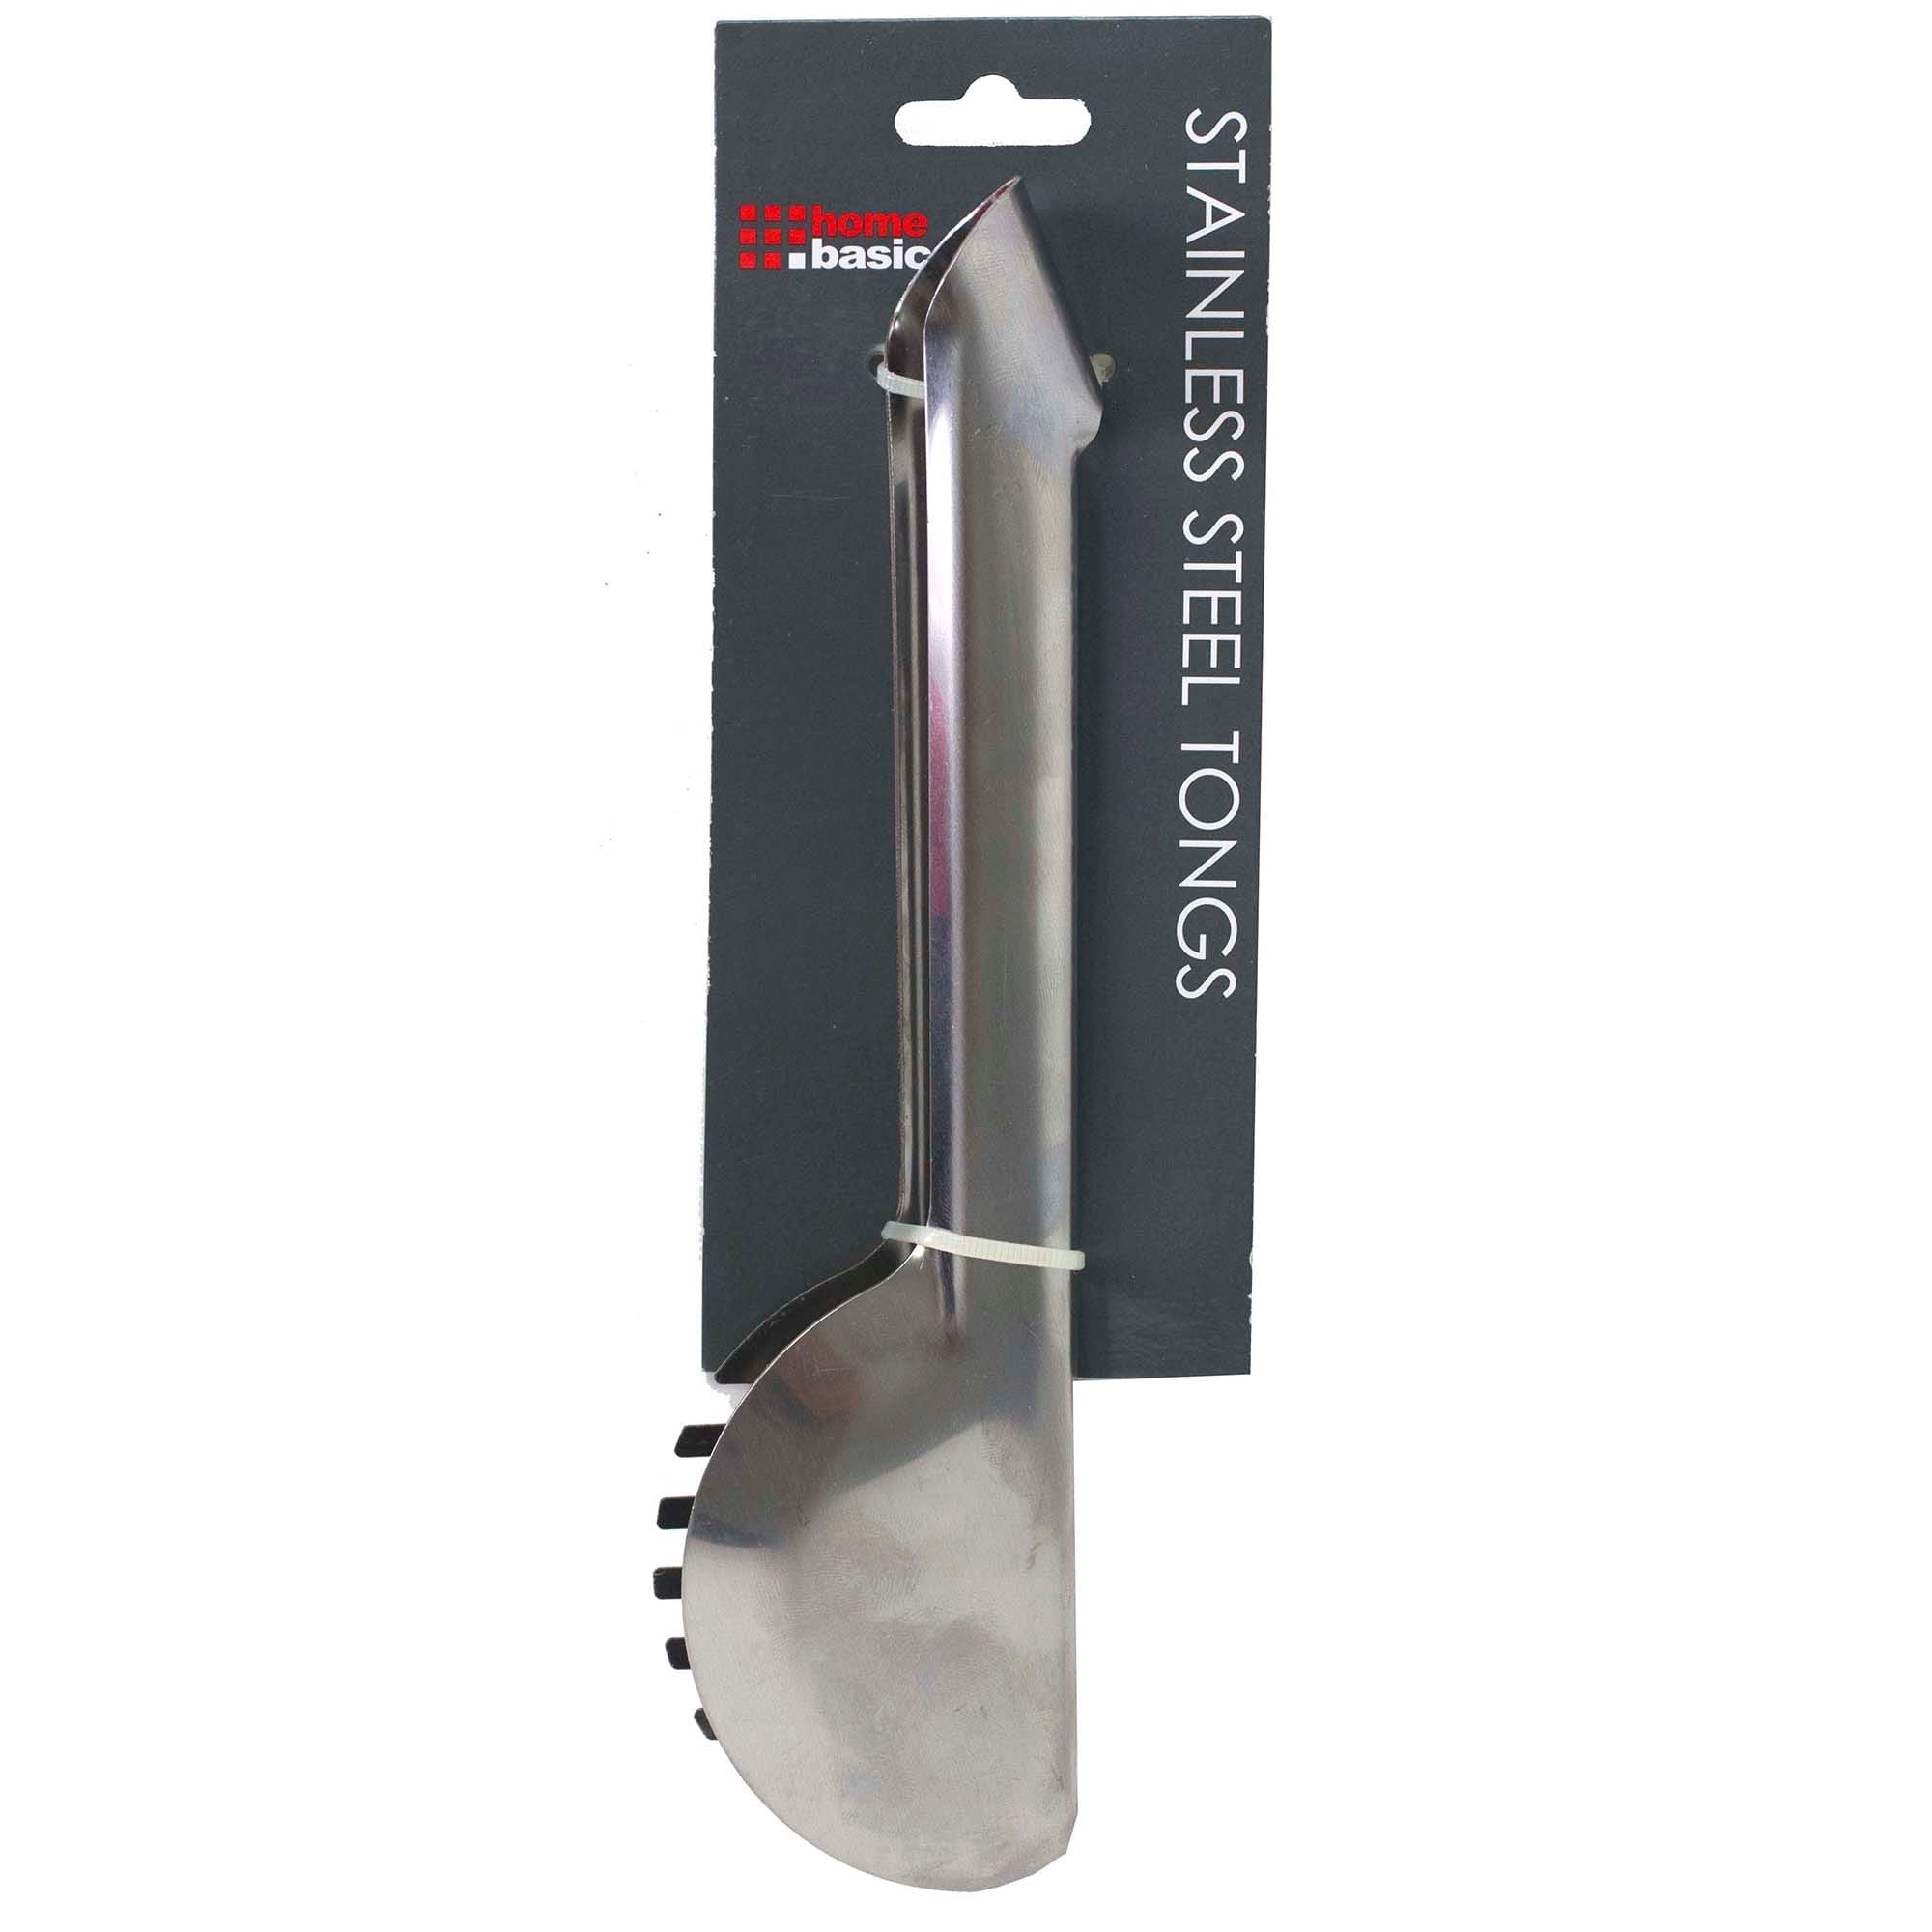 Home Basics Stainless Steel Tongs, Silver $2.00 EACH, CASE PACK OF 24